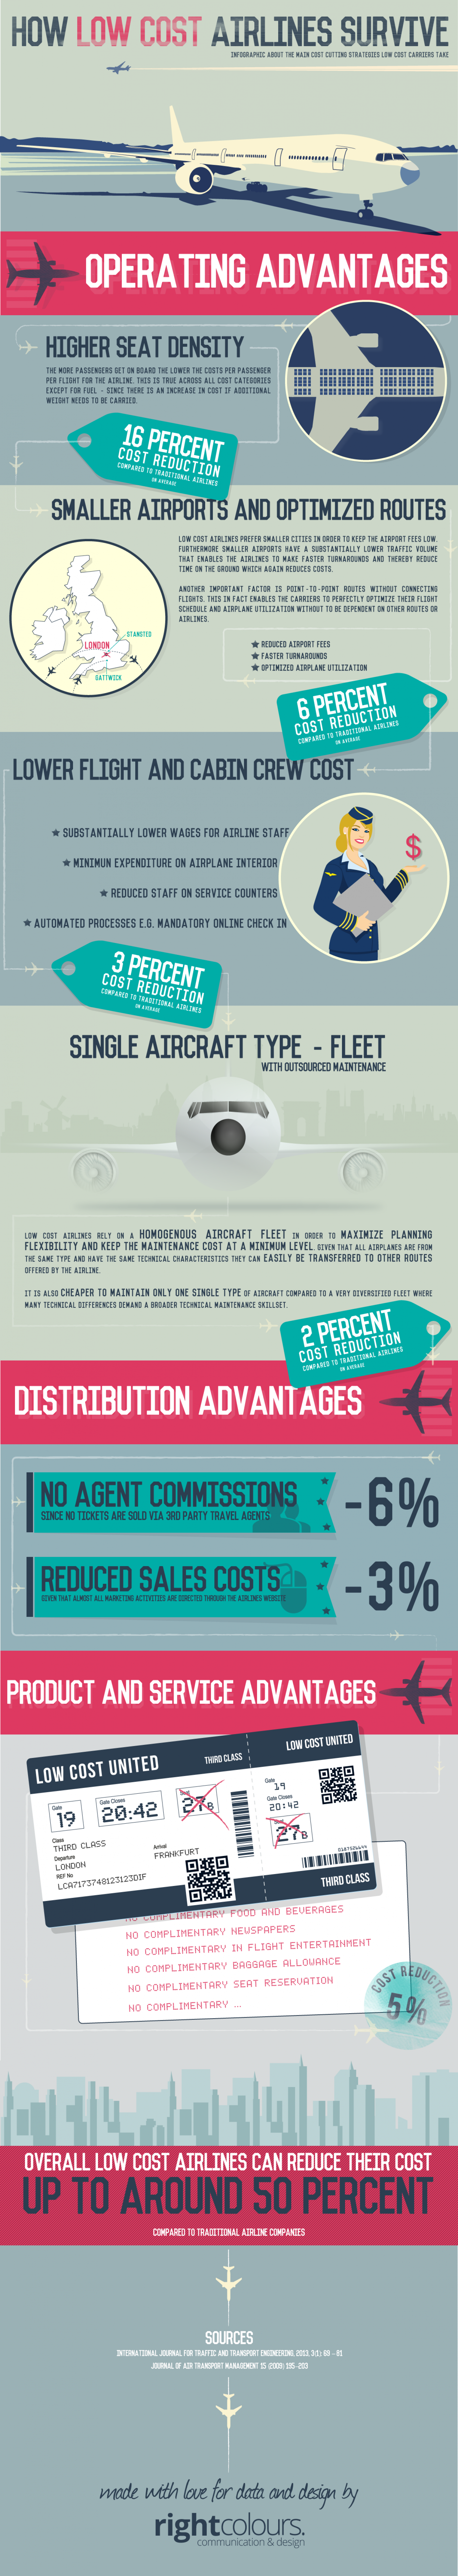 How Low Cost Airlines Survive  Infographic